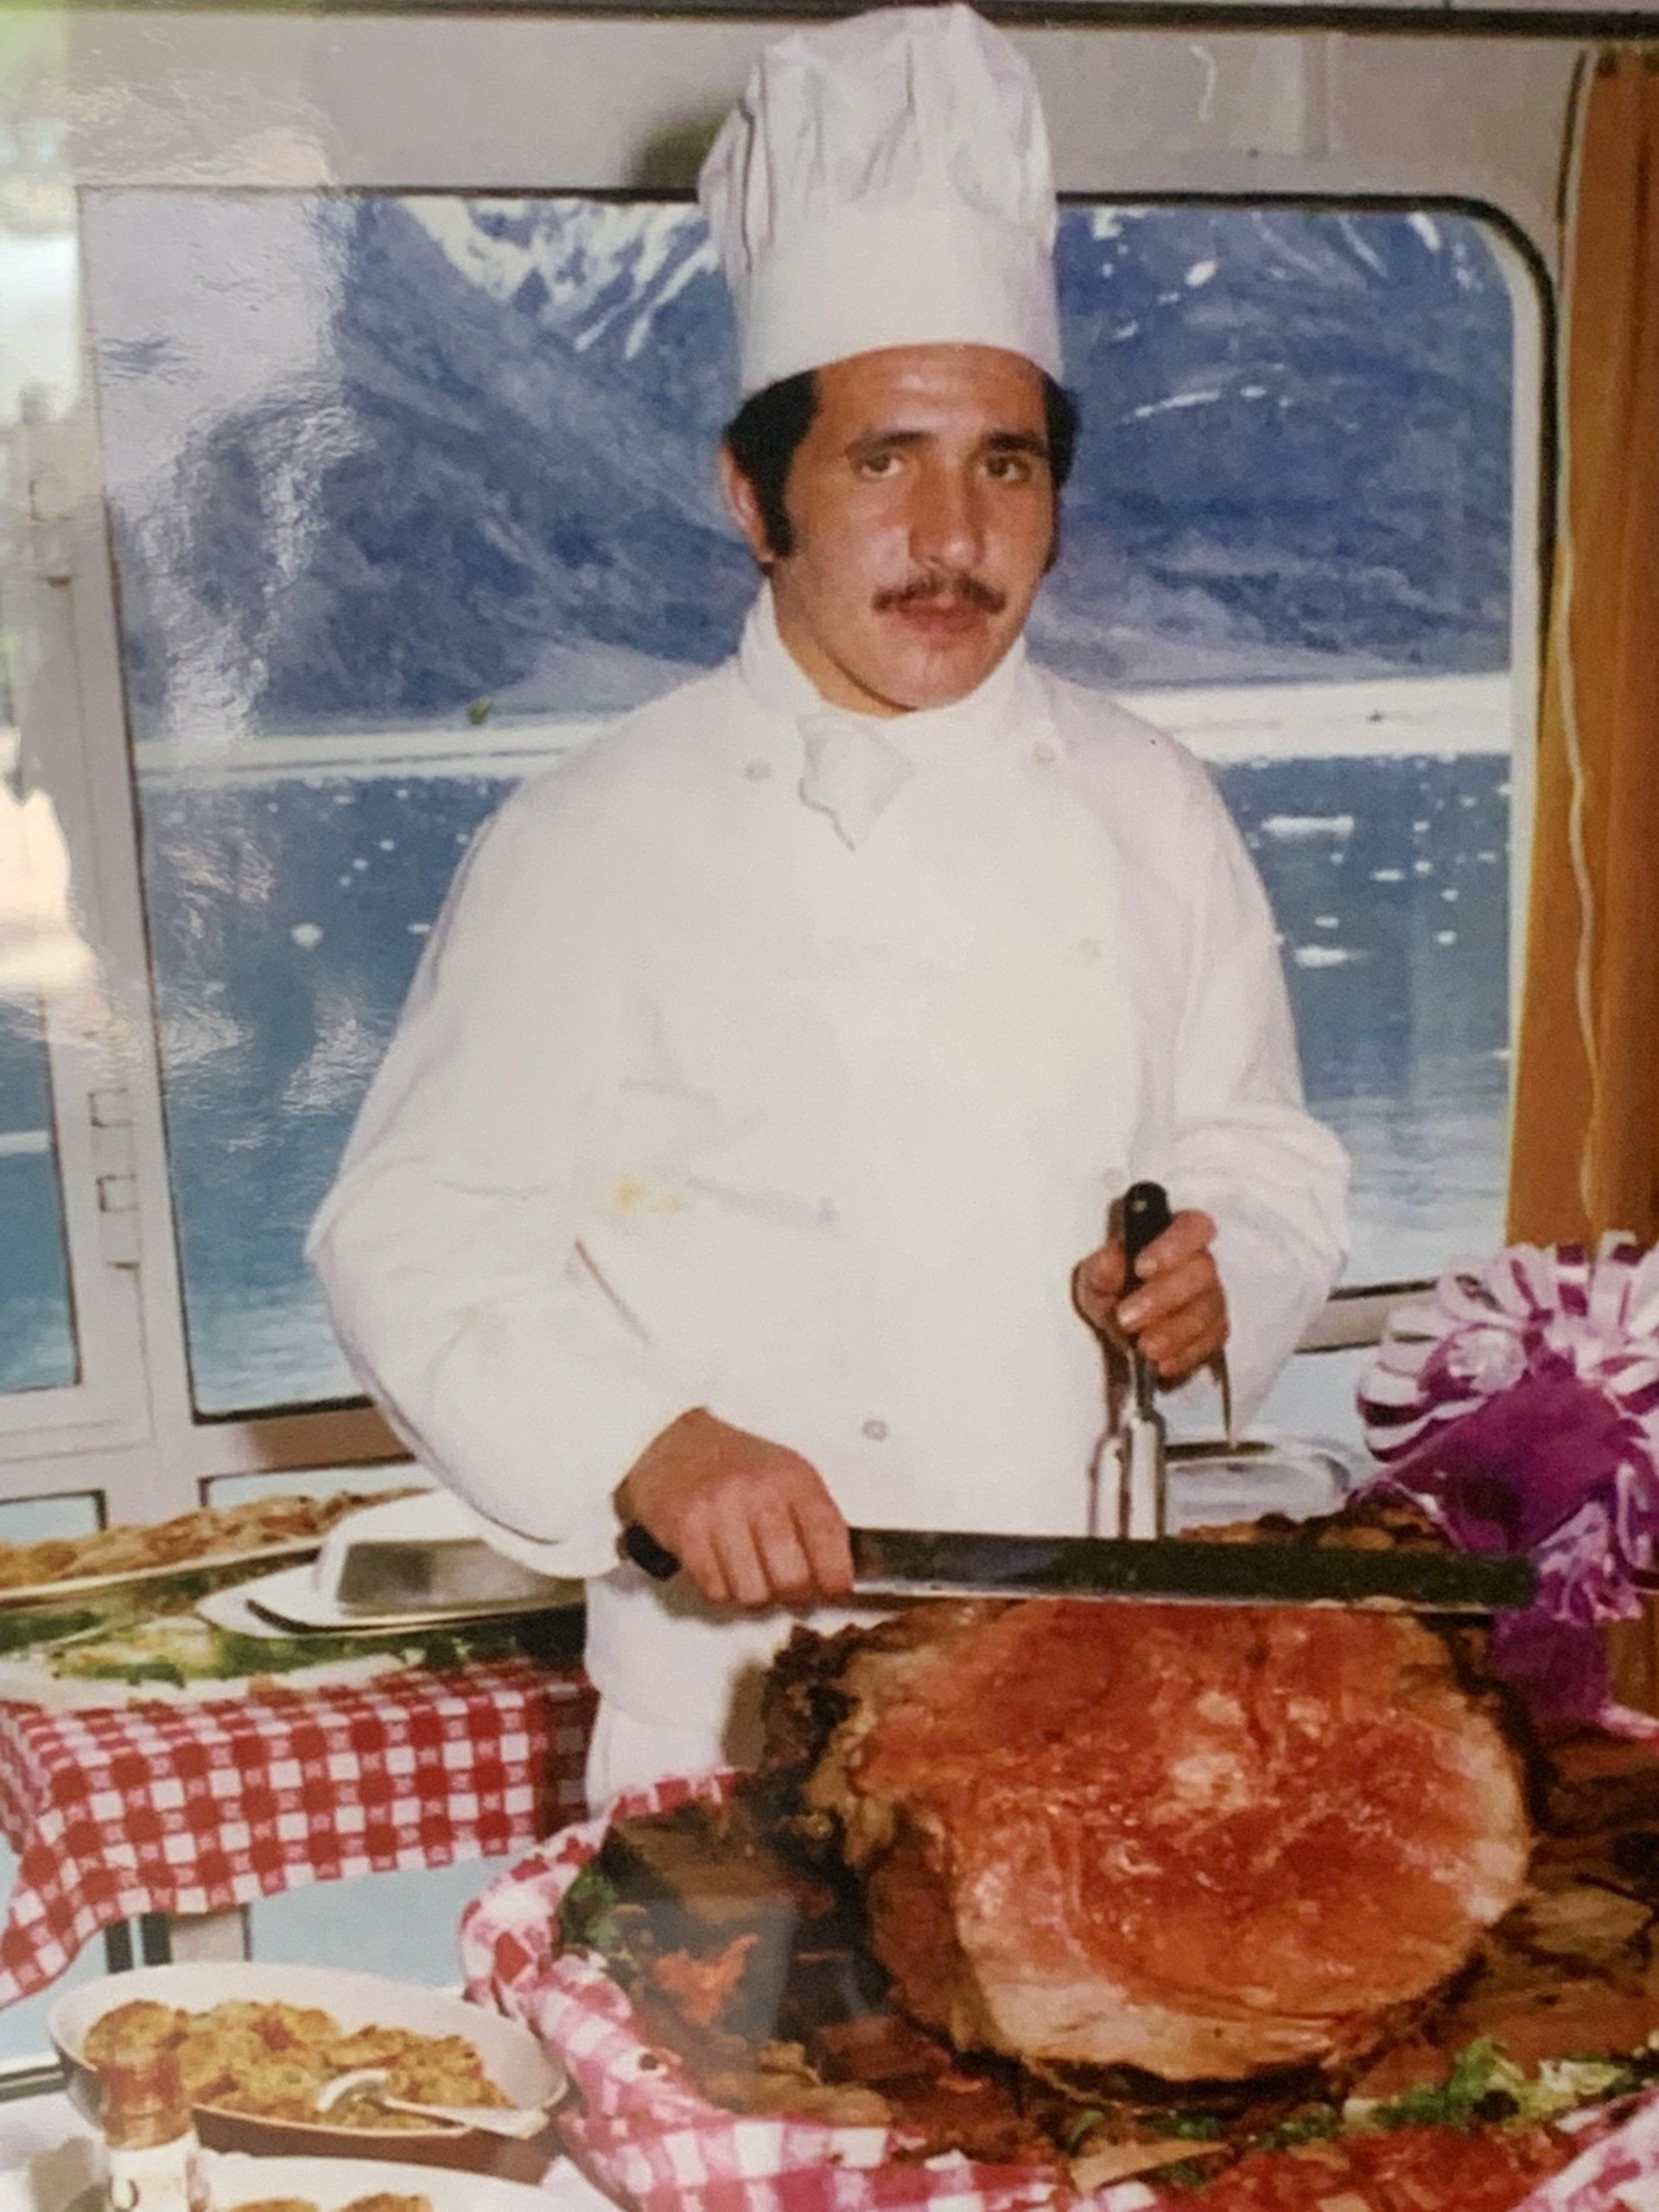 a man in a chef 's hat is cutting a large piece of meat